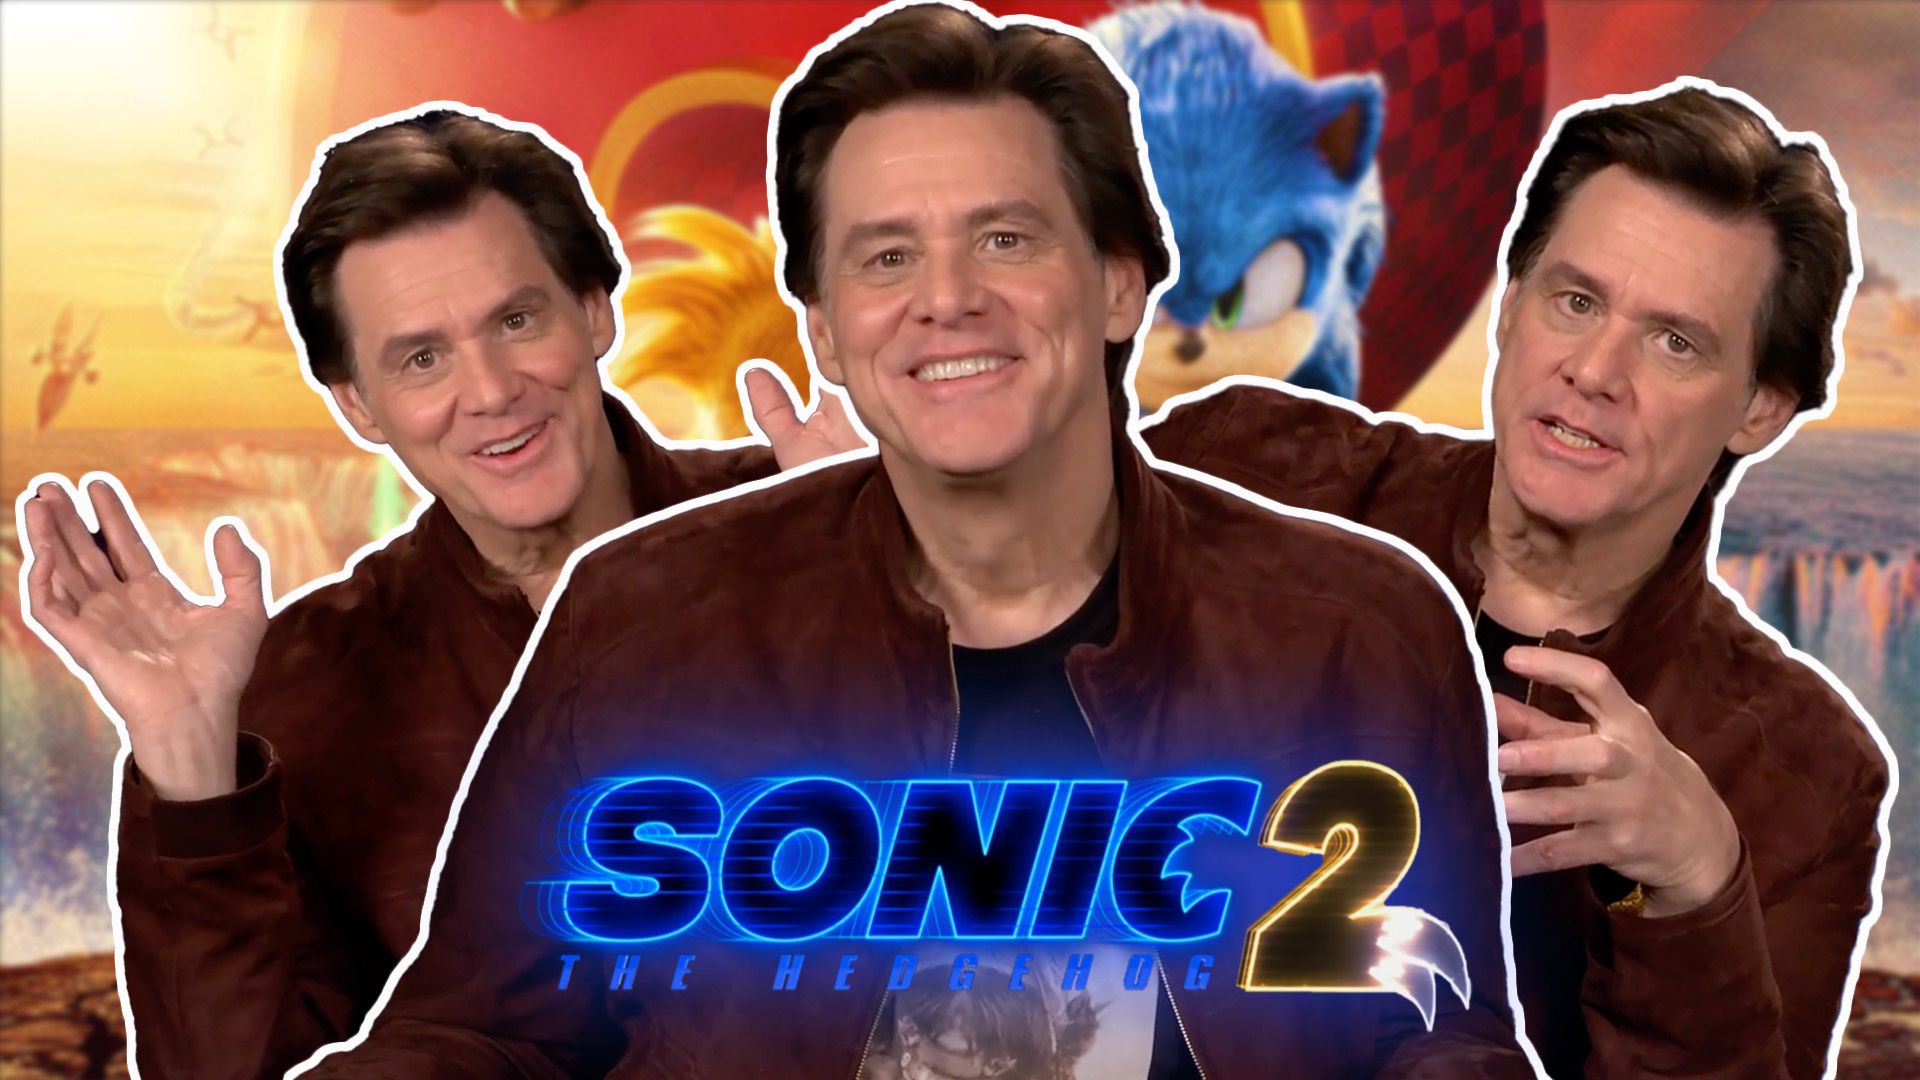 Sonic The Hedgehog 3 Release Date, Cast, Director, And More Details